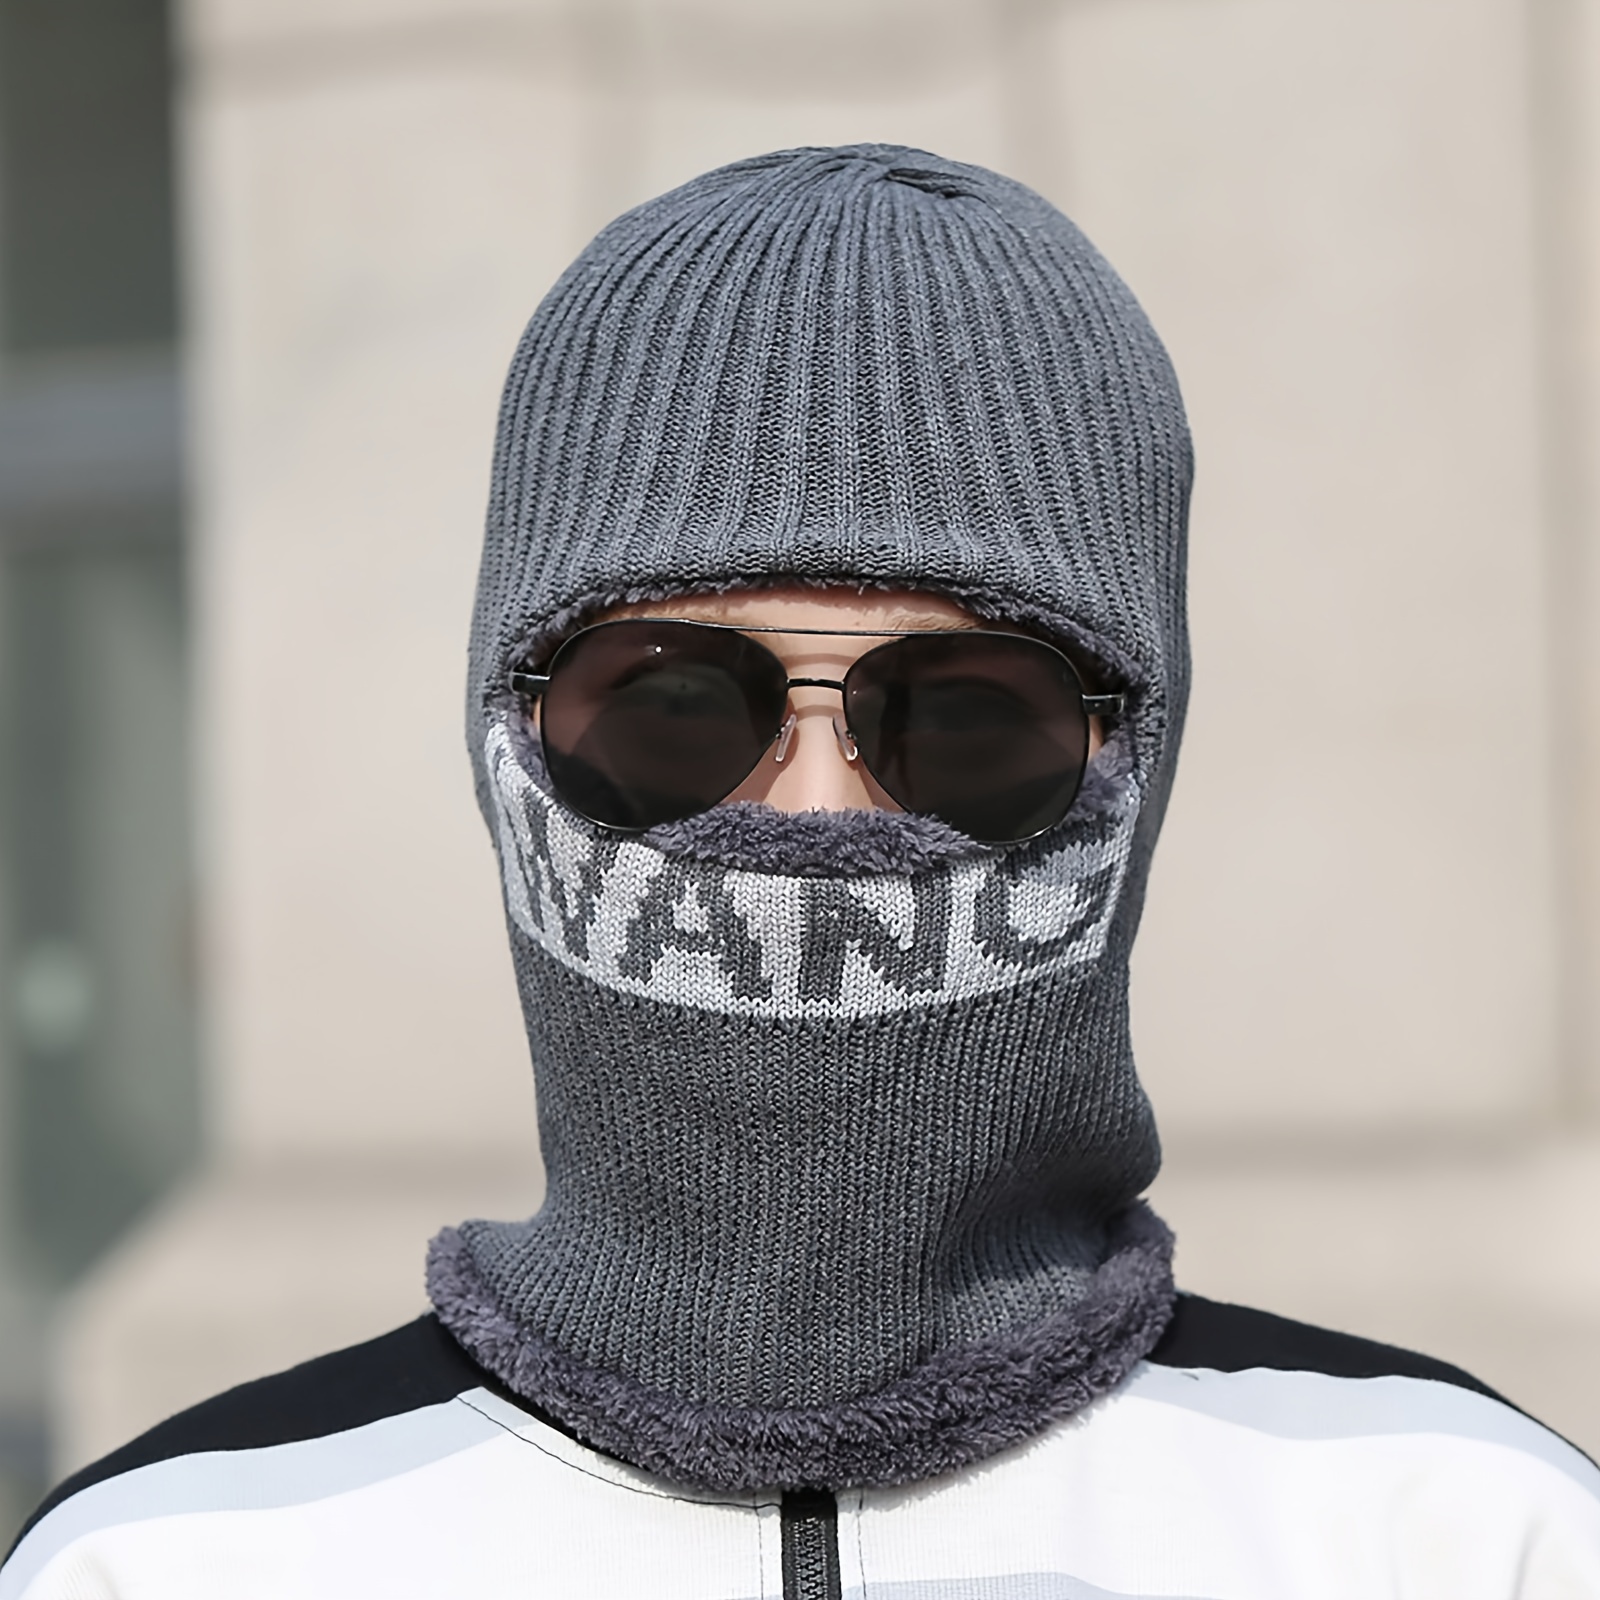 Winter Balaclava Ski Mask Fleece Thermal Face Mask With Ear Cover for Men  Women